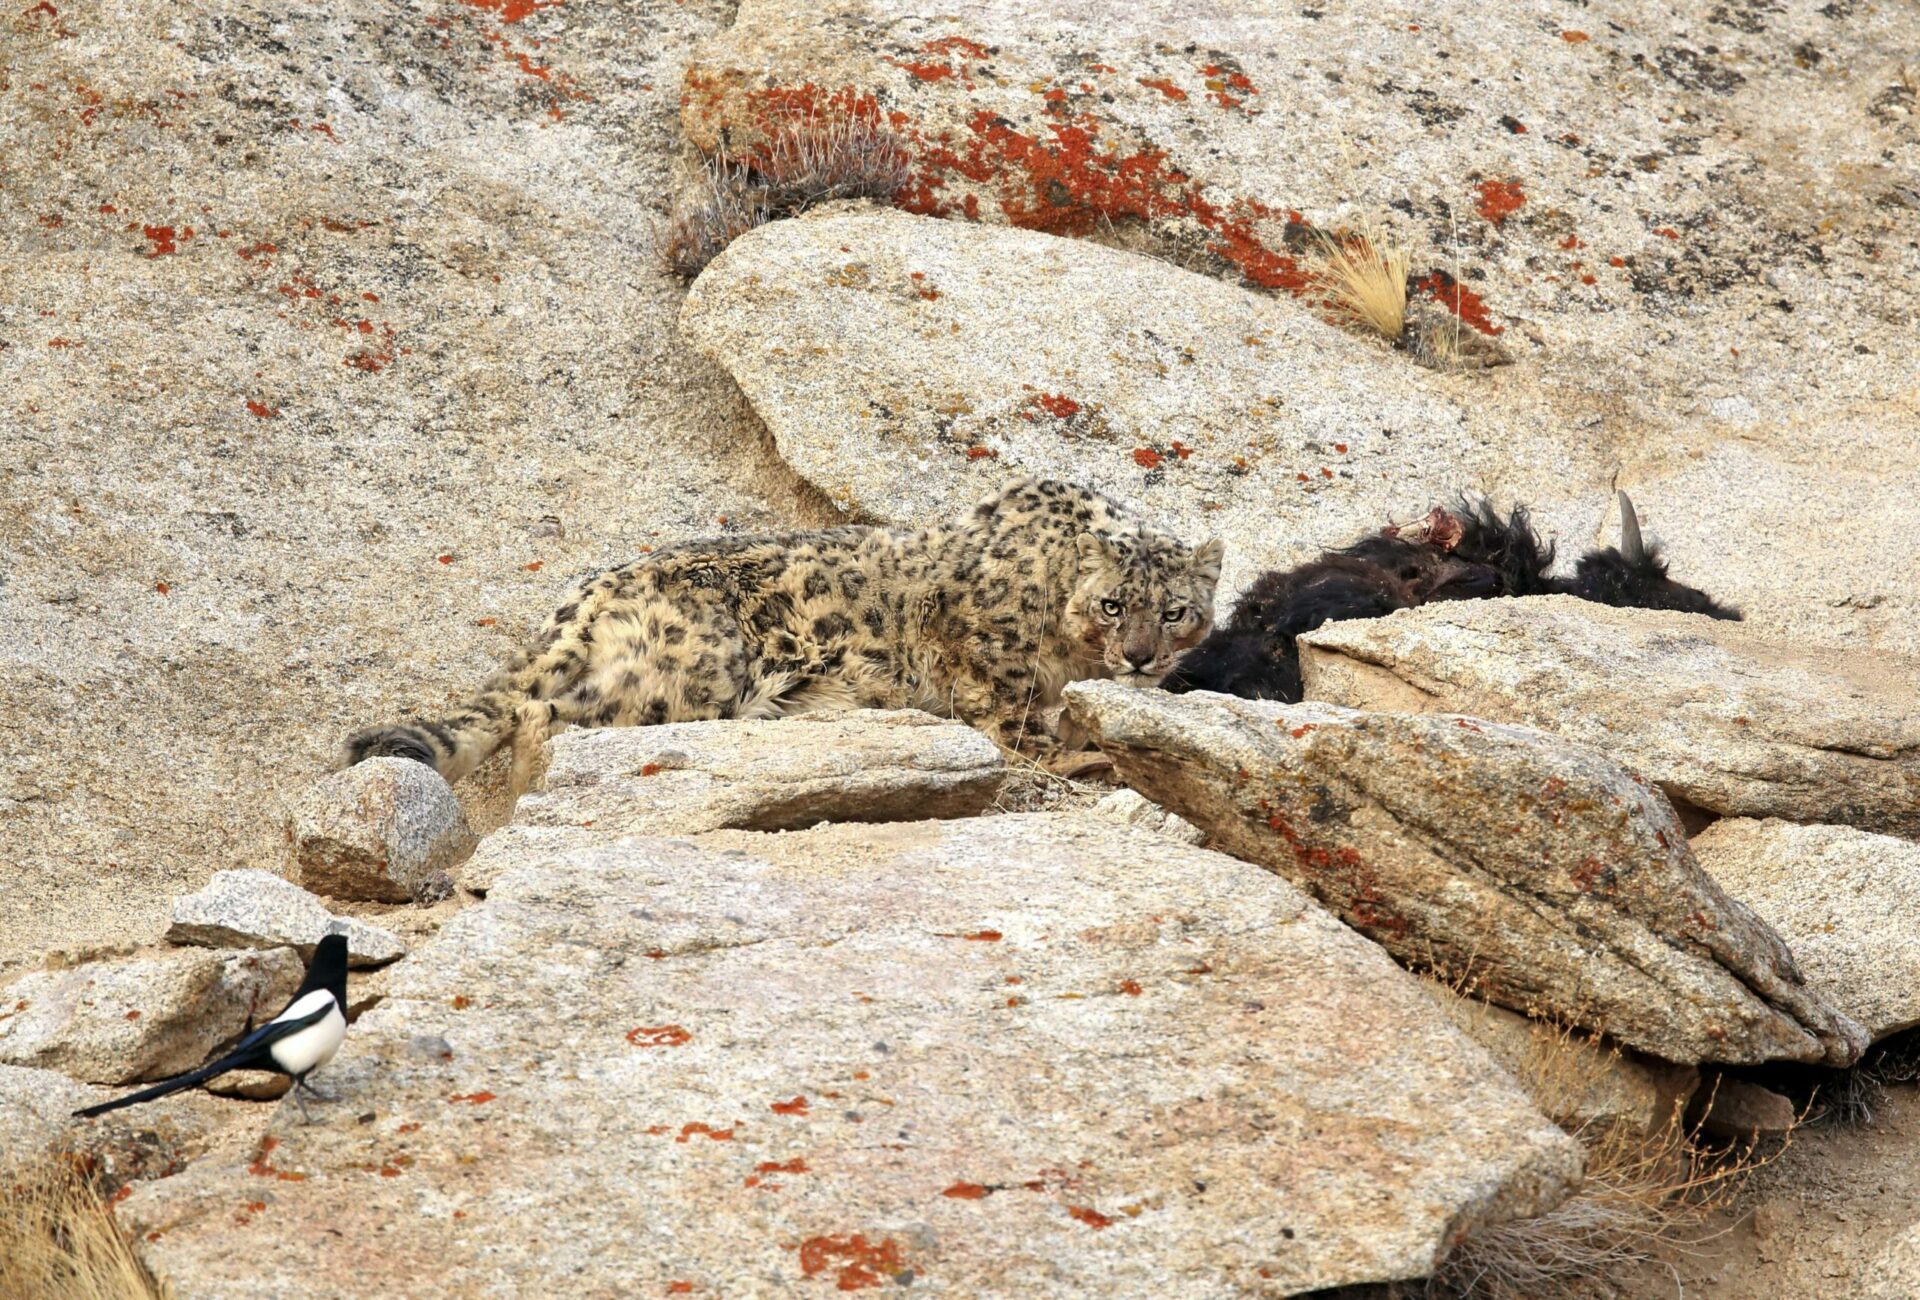 snow leopard stalking something along the rocks seen on an Indian Subcontinent safari